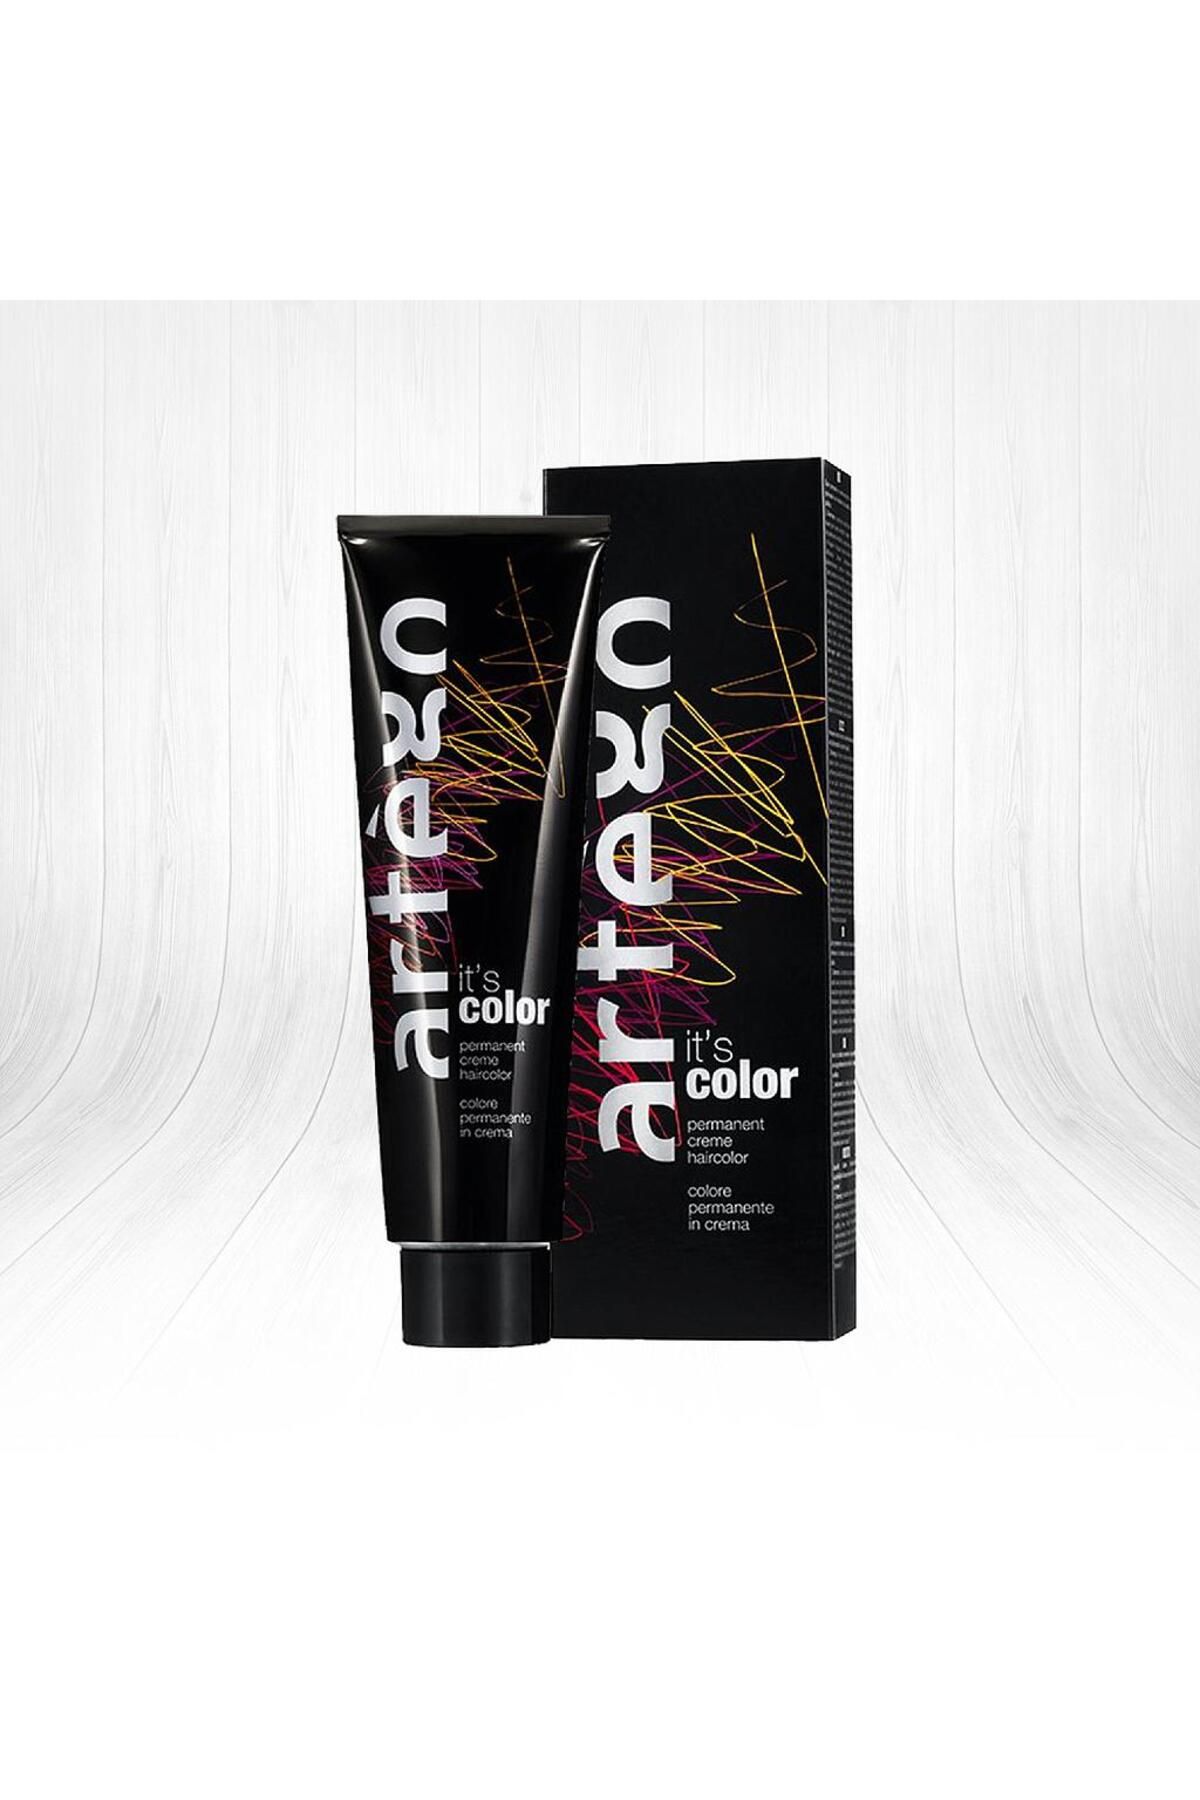 Artego NEW 9.16 IT'S COLOR VERY LIGHT RED ASH BLONDE 150ML.